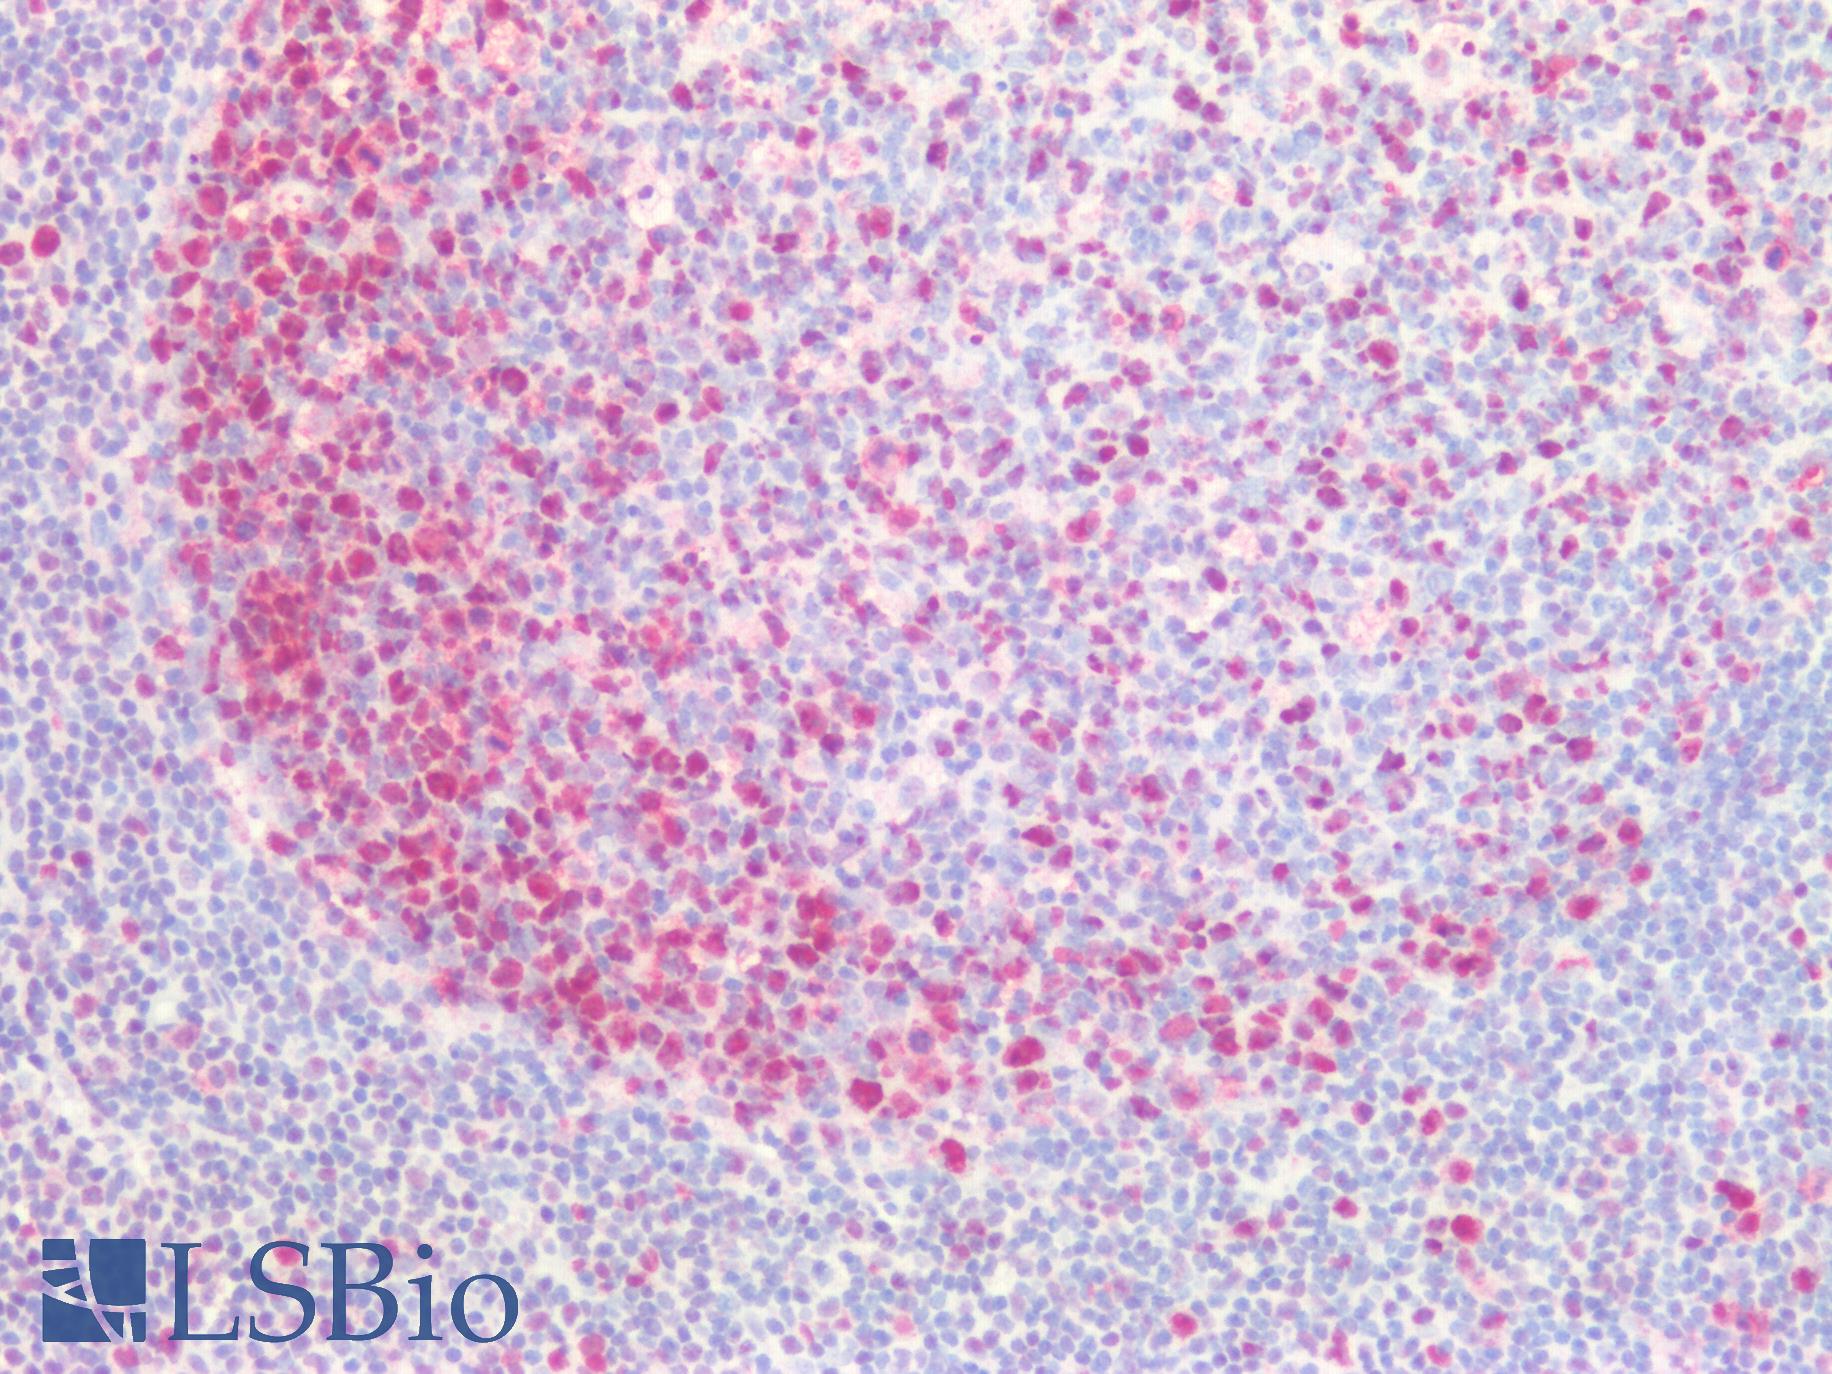 PCNA Antibody - Human Tonsil: Formalin-Fixed, Paraffin-Embedded (FFPE)